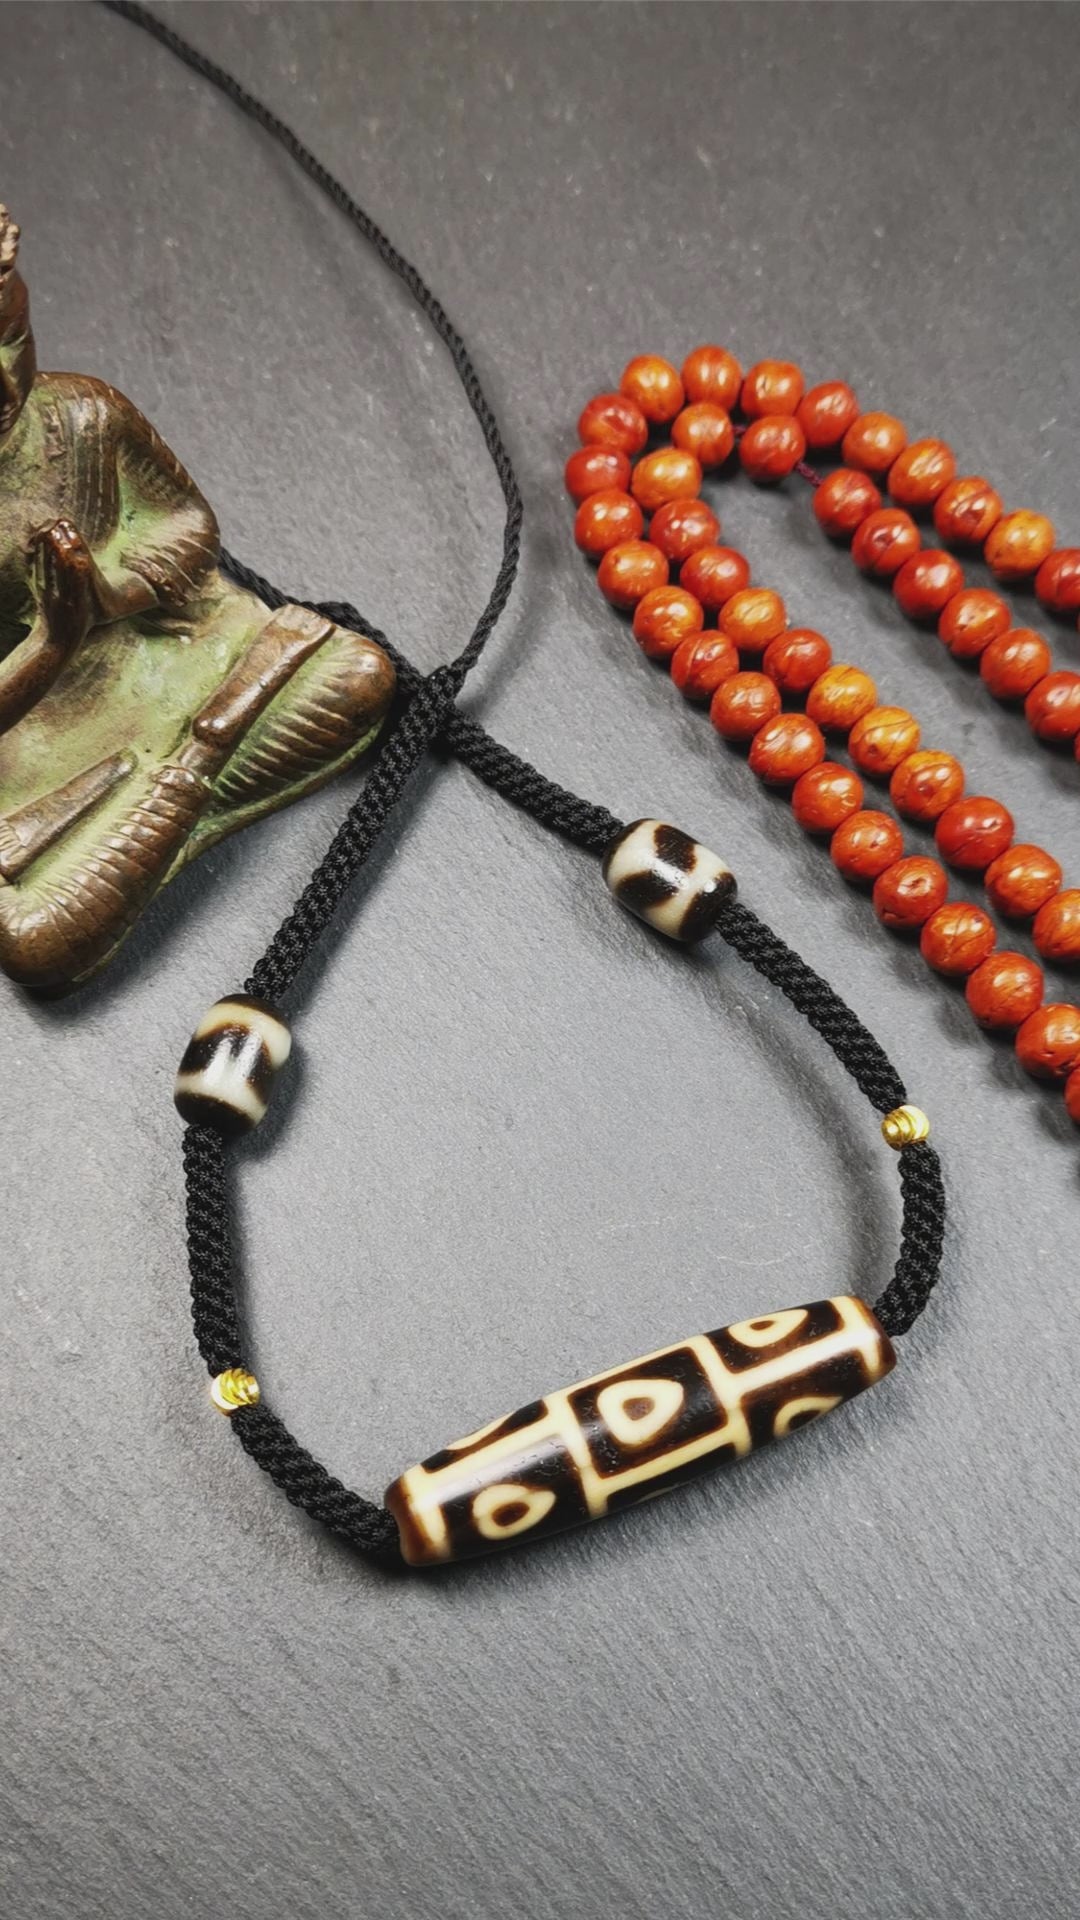 This necklace was hand-woven by Tibetans from Baiyu County, the main bead is a 9 eyed bodhi dzi bead, paired with 2 small tiger tooth dzi beads,about 30 years old. It can be worn as a fashionable accessory,holds cultural and religious significance.